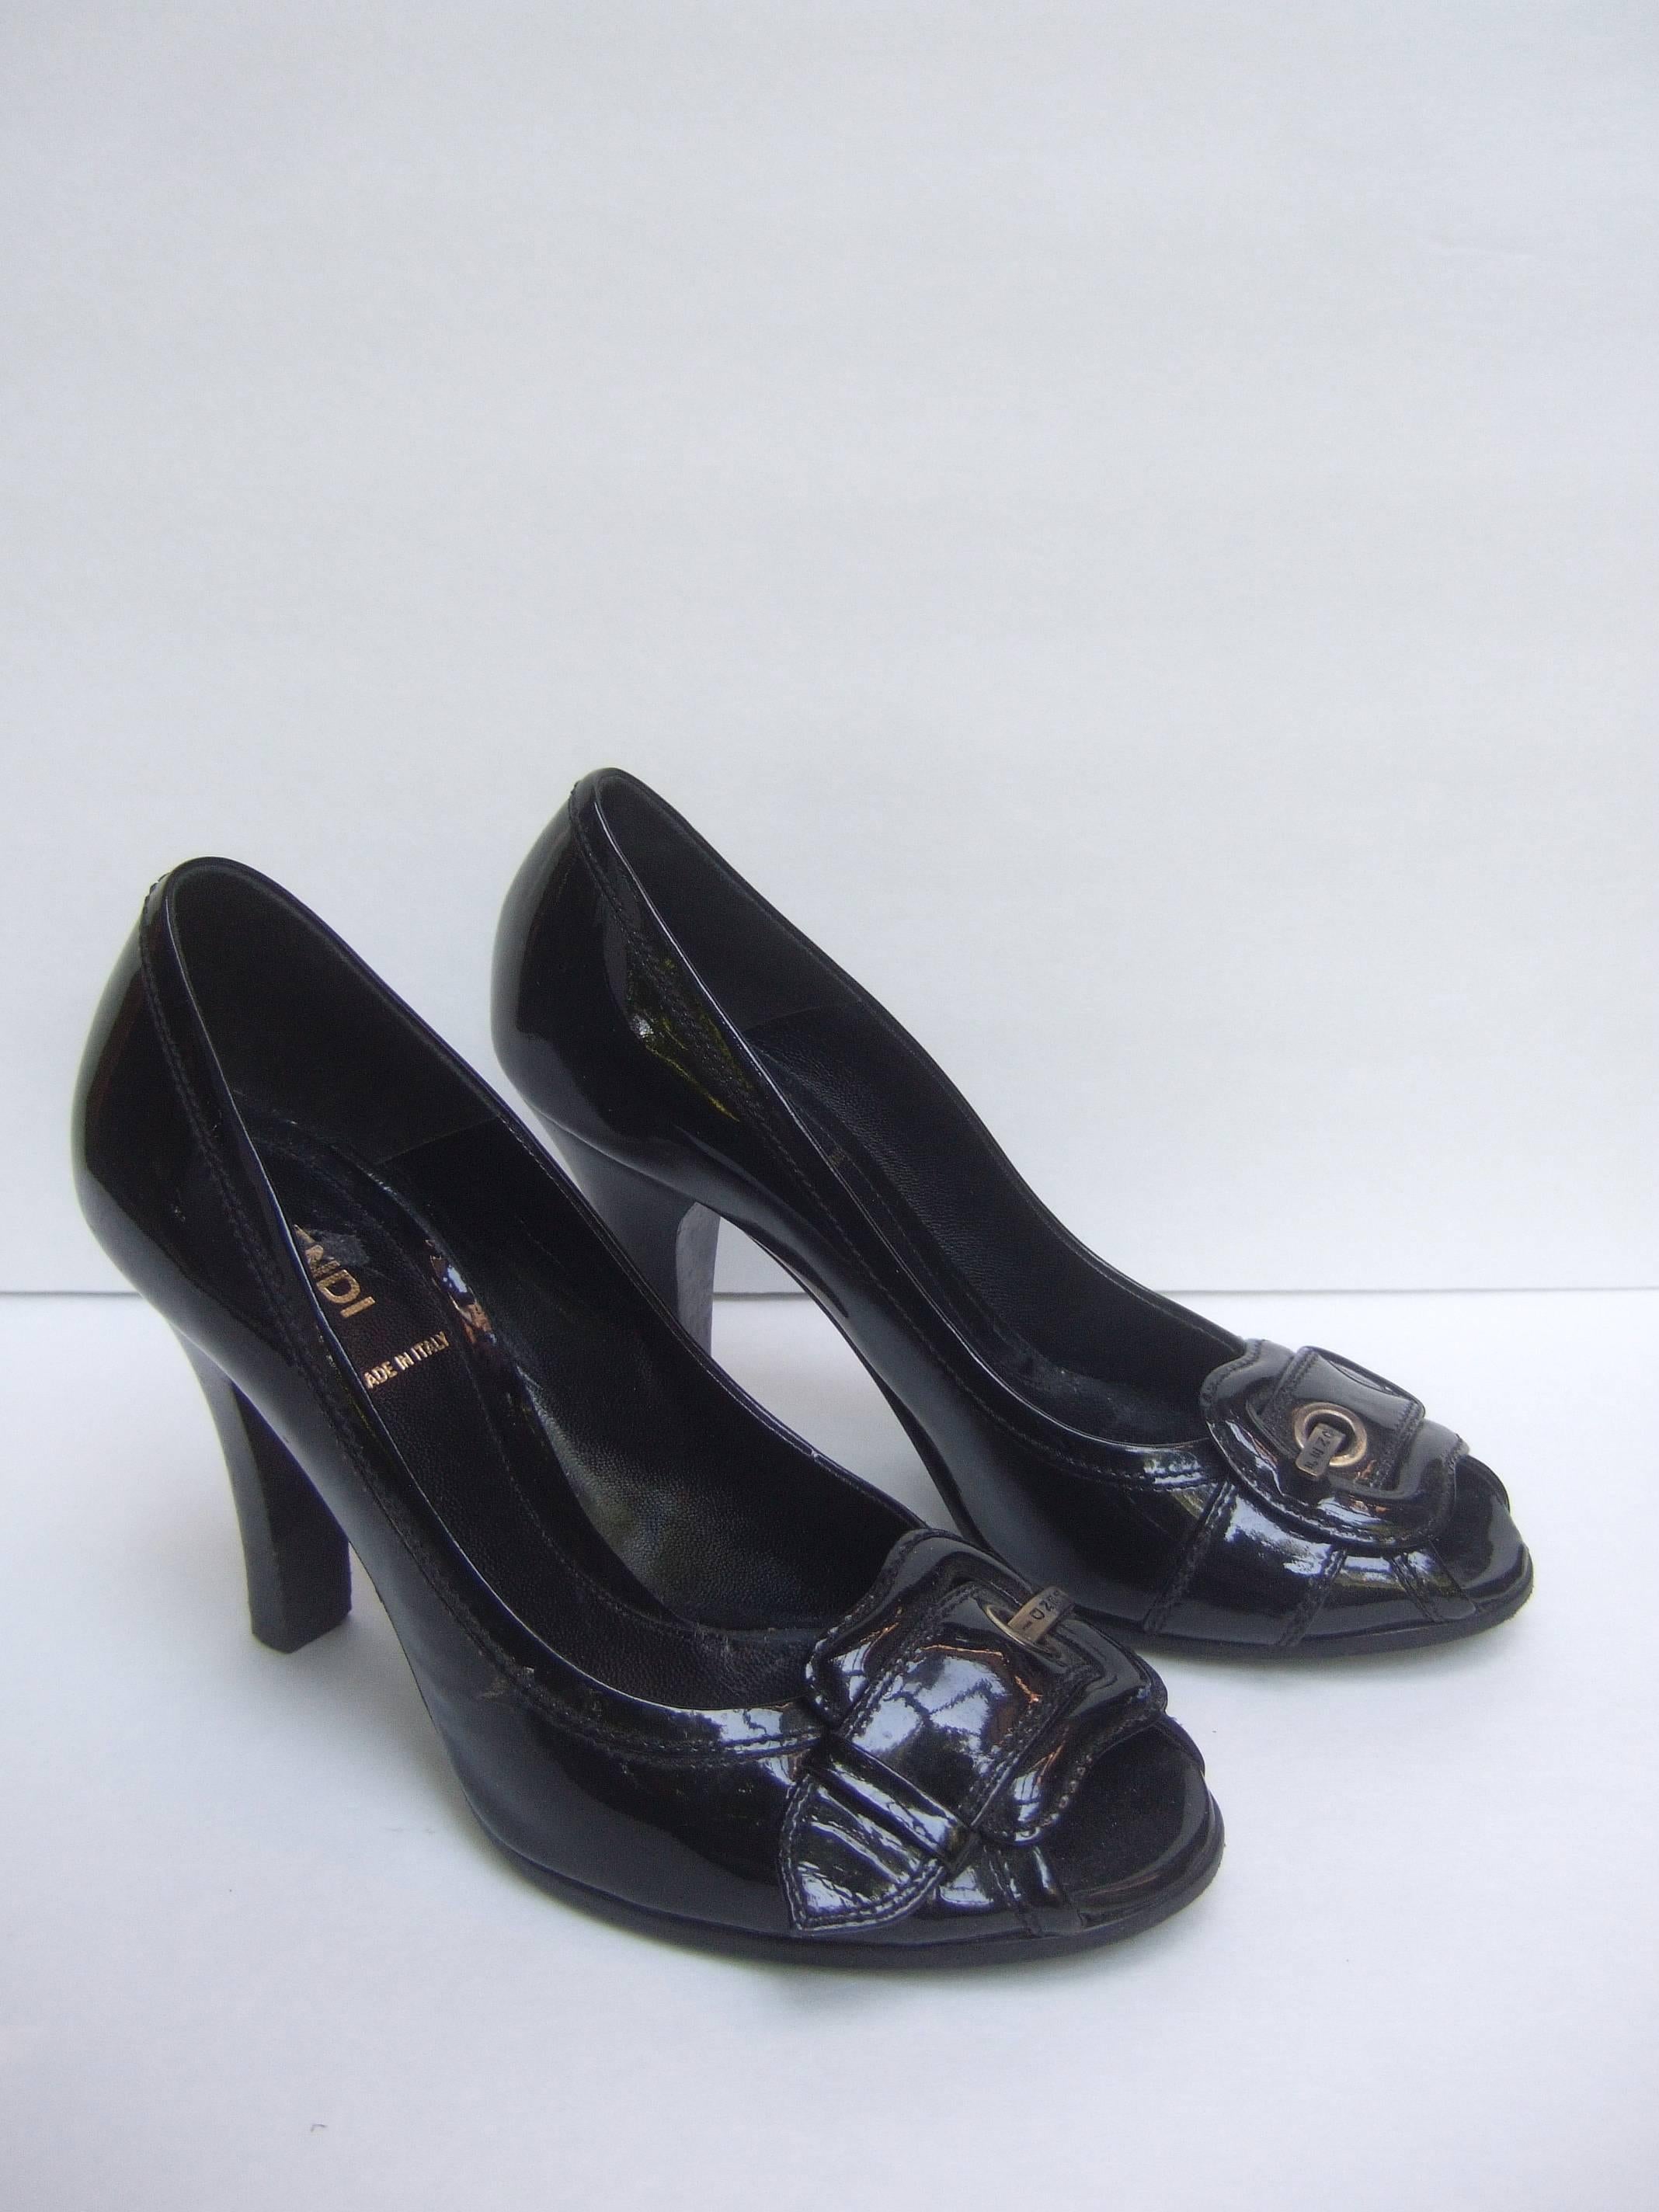 Fendi Italy Black patent leather buckle pumps 37.5
The stylish Italian pumps are covered with shiny
black patent leather

The peep toe pumps are accented with burnished
brass metal buckles stamped Fendi 

Stamped Fendi Made in Italy 
Size